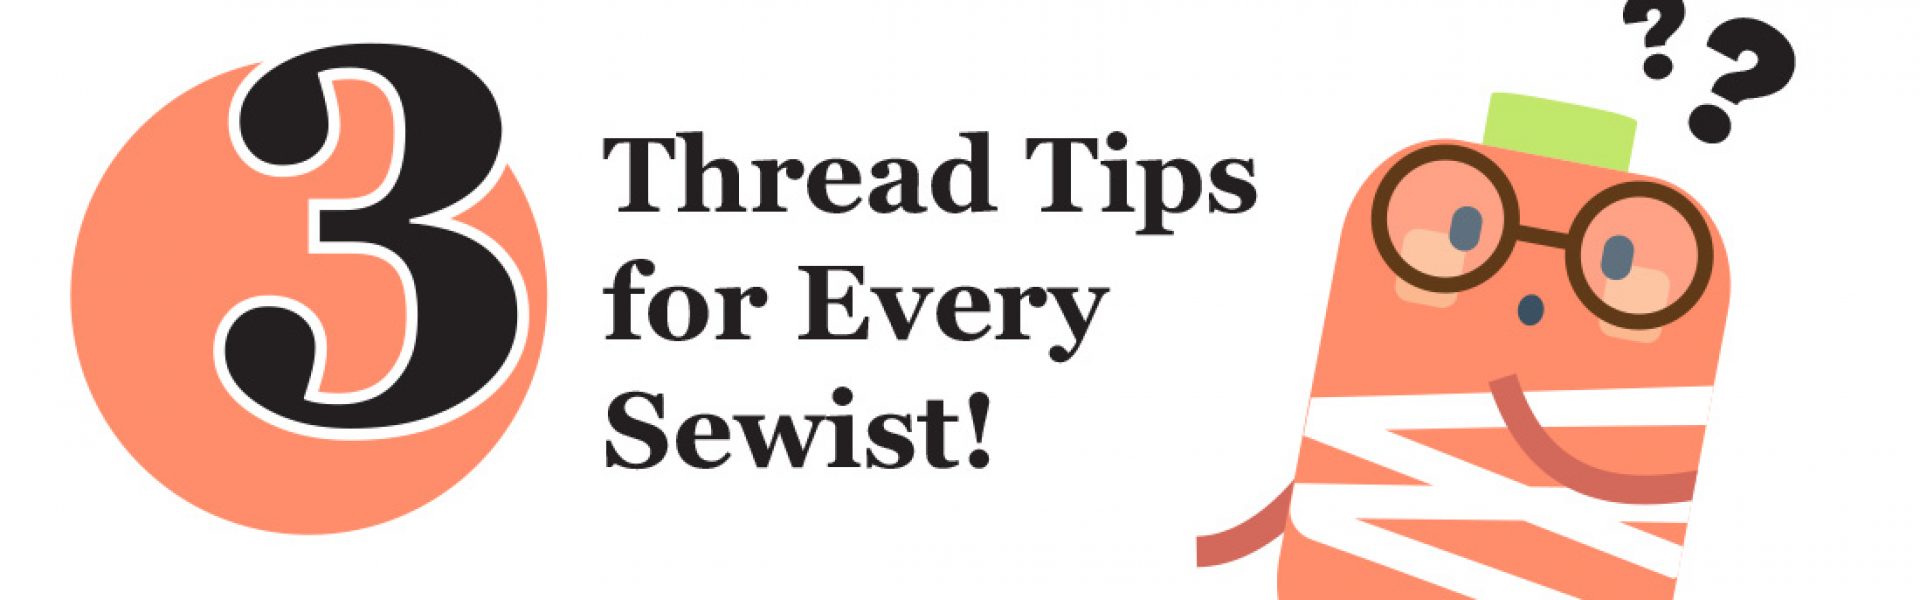 3 thread tips for every sewist.